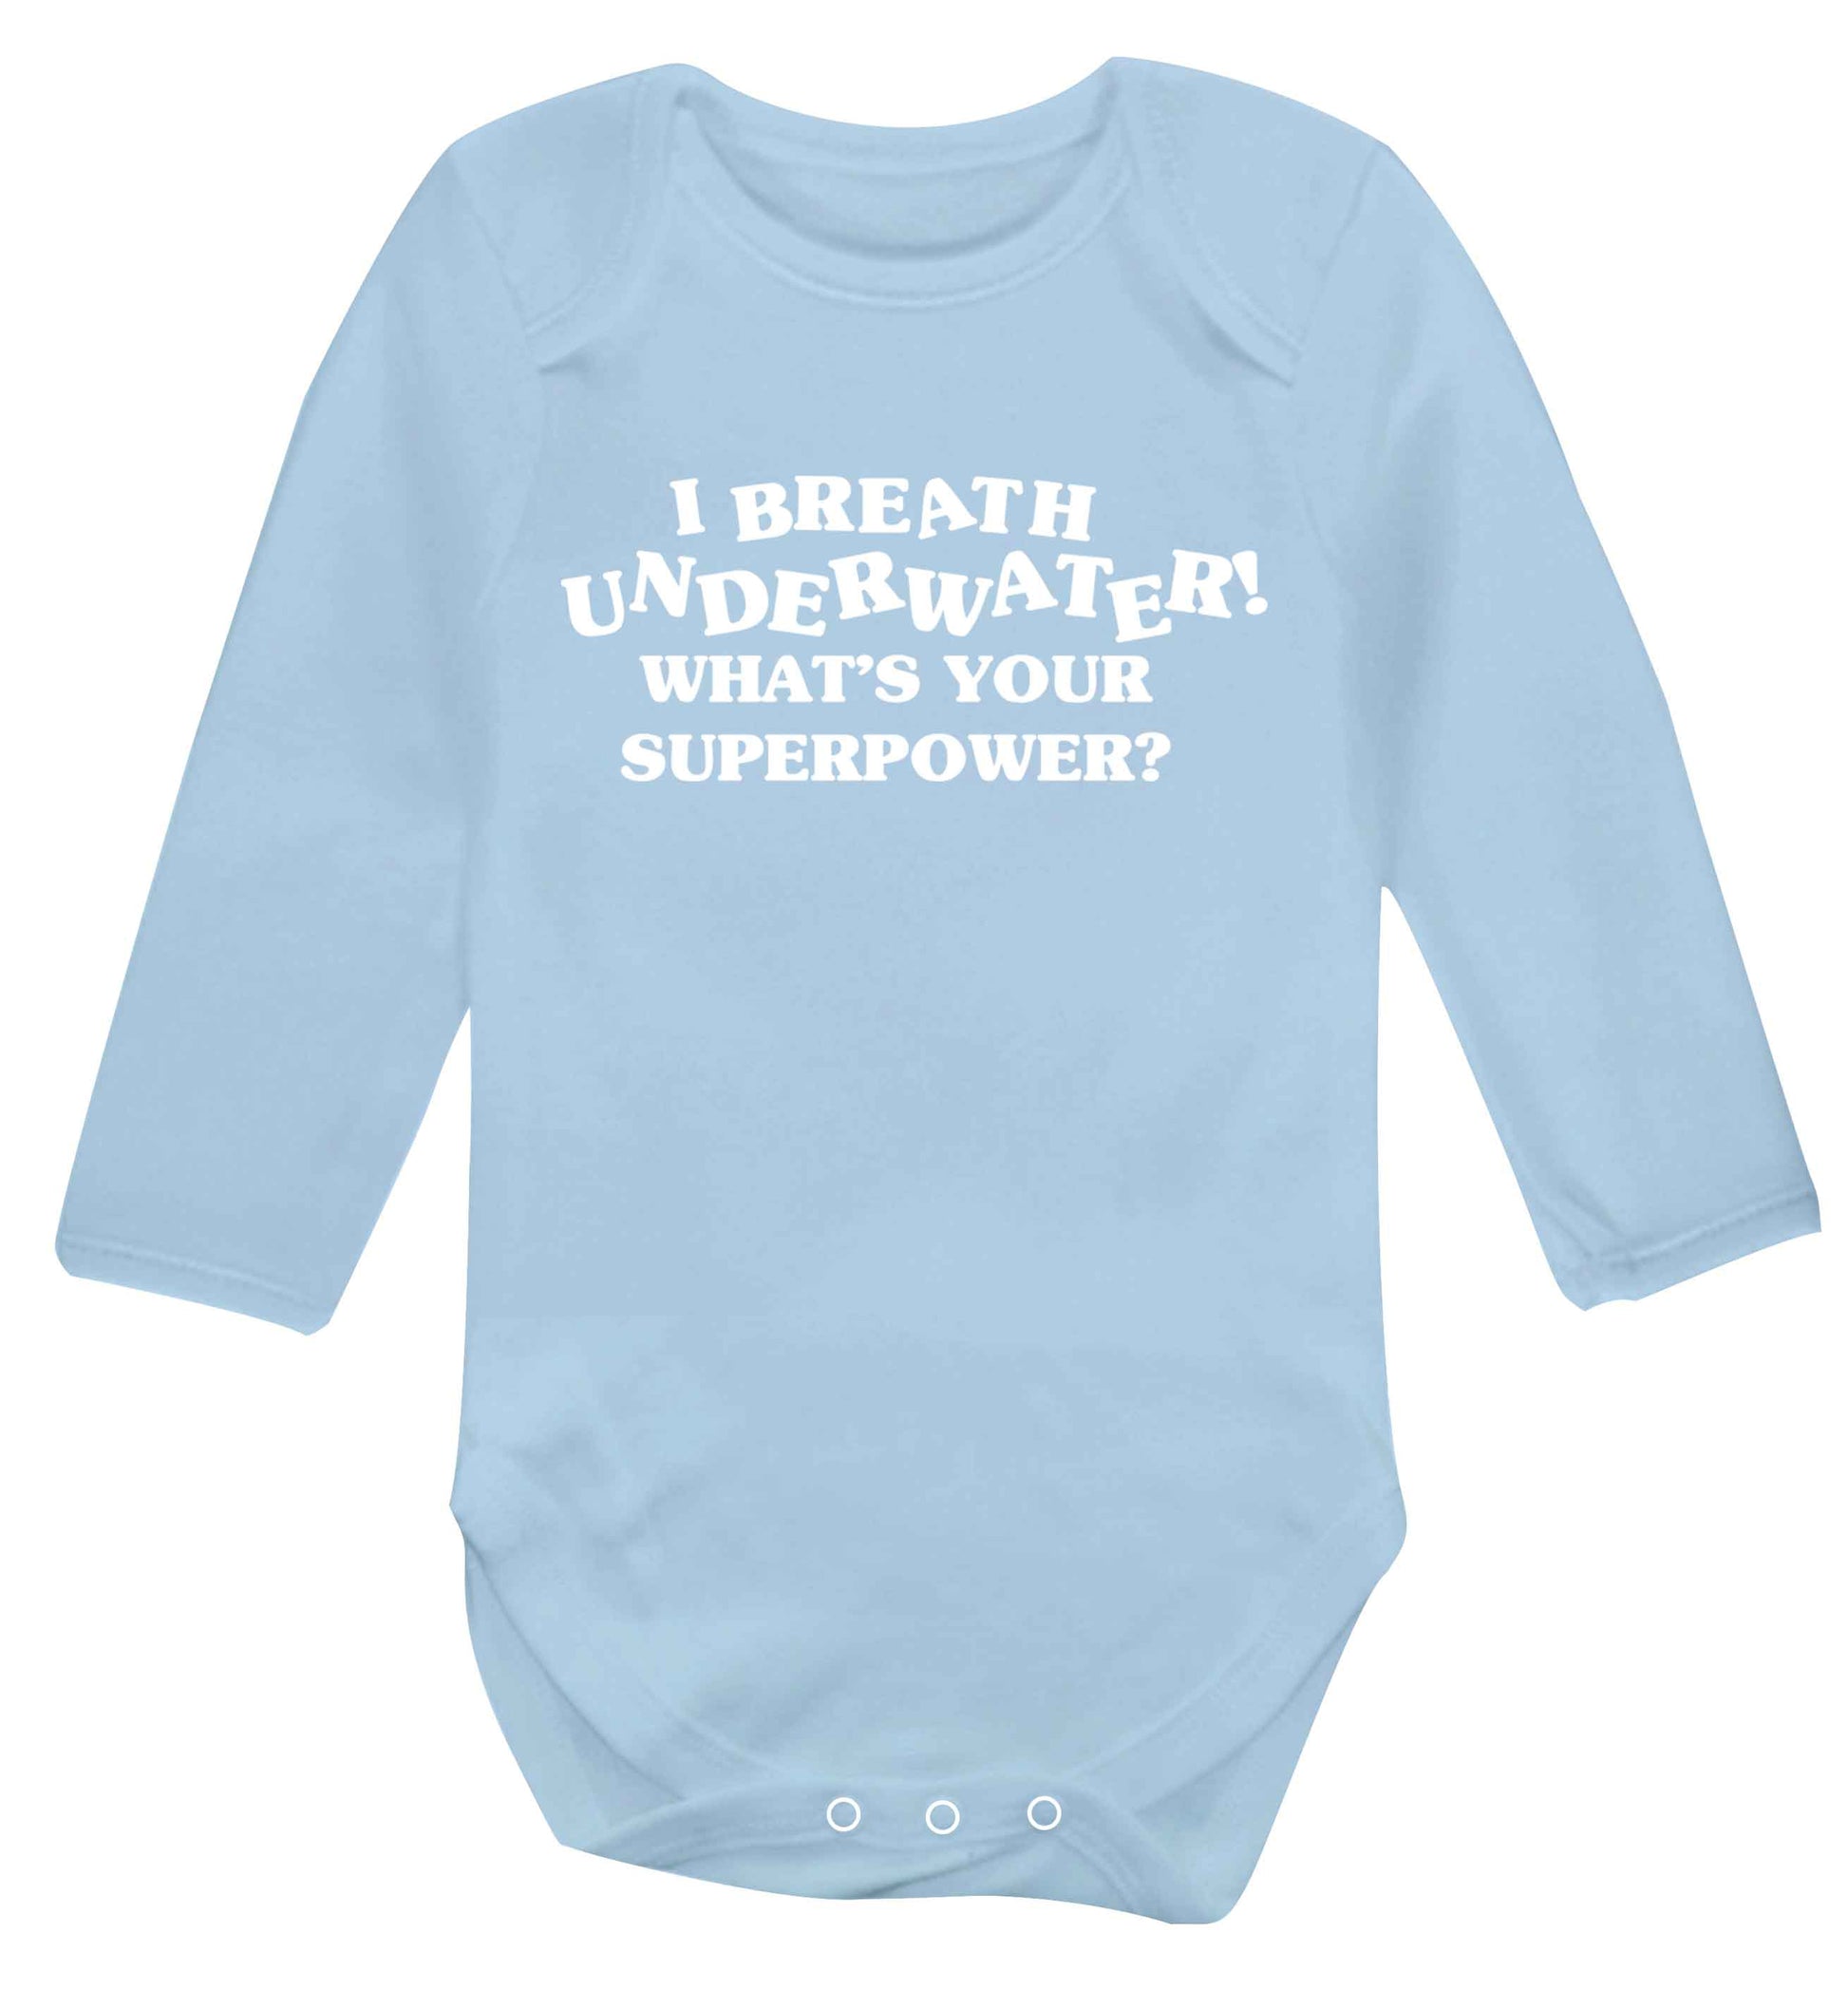 I breath underwater what's your superpower? Baby Vest long sleeved pale blue 6-12 months